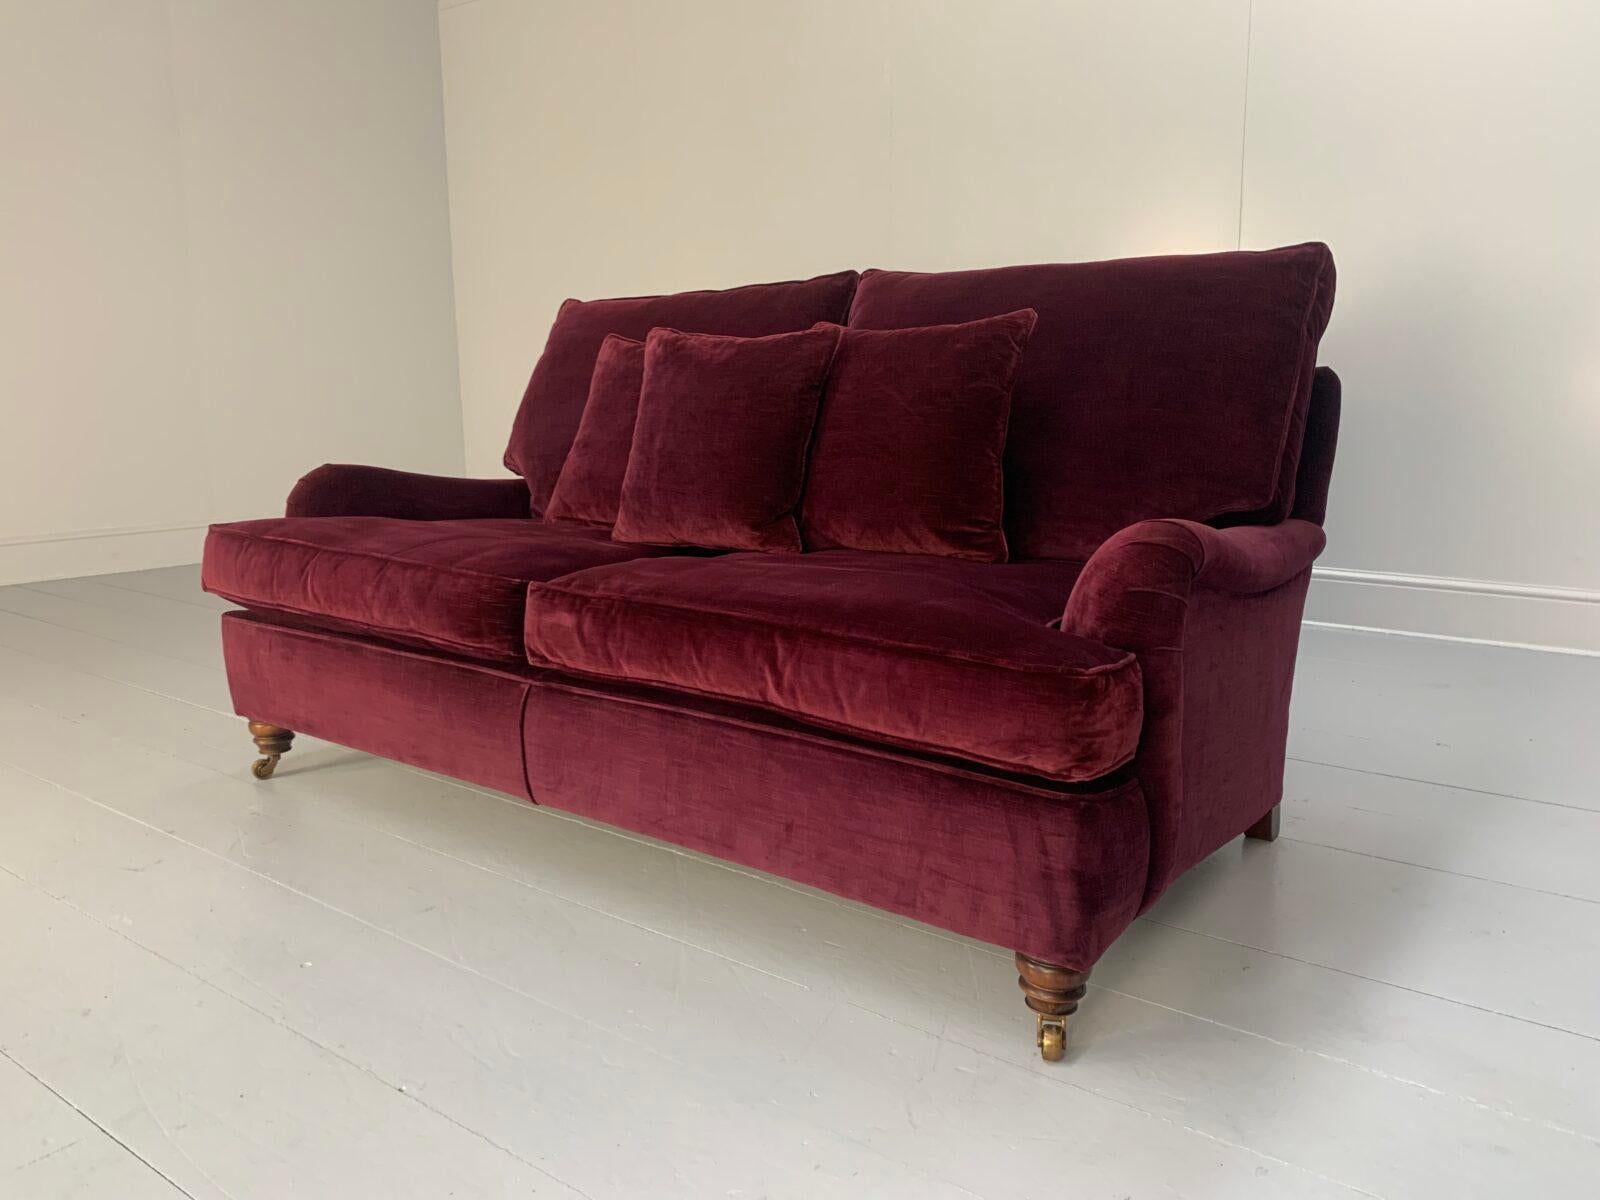 Hello Friends, and welcome to another unmissable offering from Lord Browns Furniture, the UK’s premier resource for fine Sofas and Chairs.

On offer on this occasion is a superb, majestic Duresta “Lansdowne” 2-Seat Sofa, dressed in their stunning,